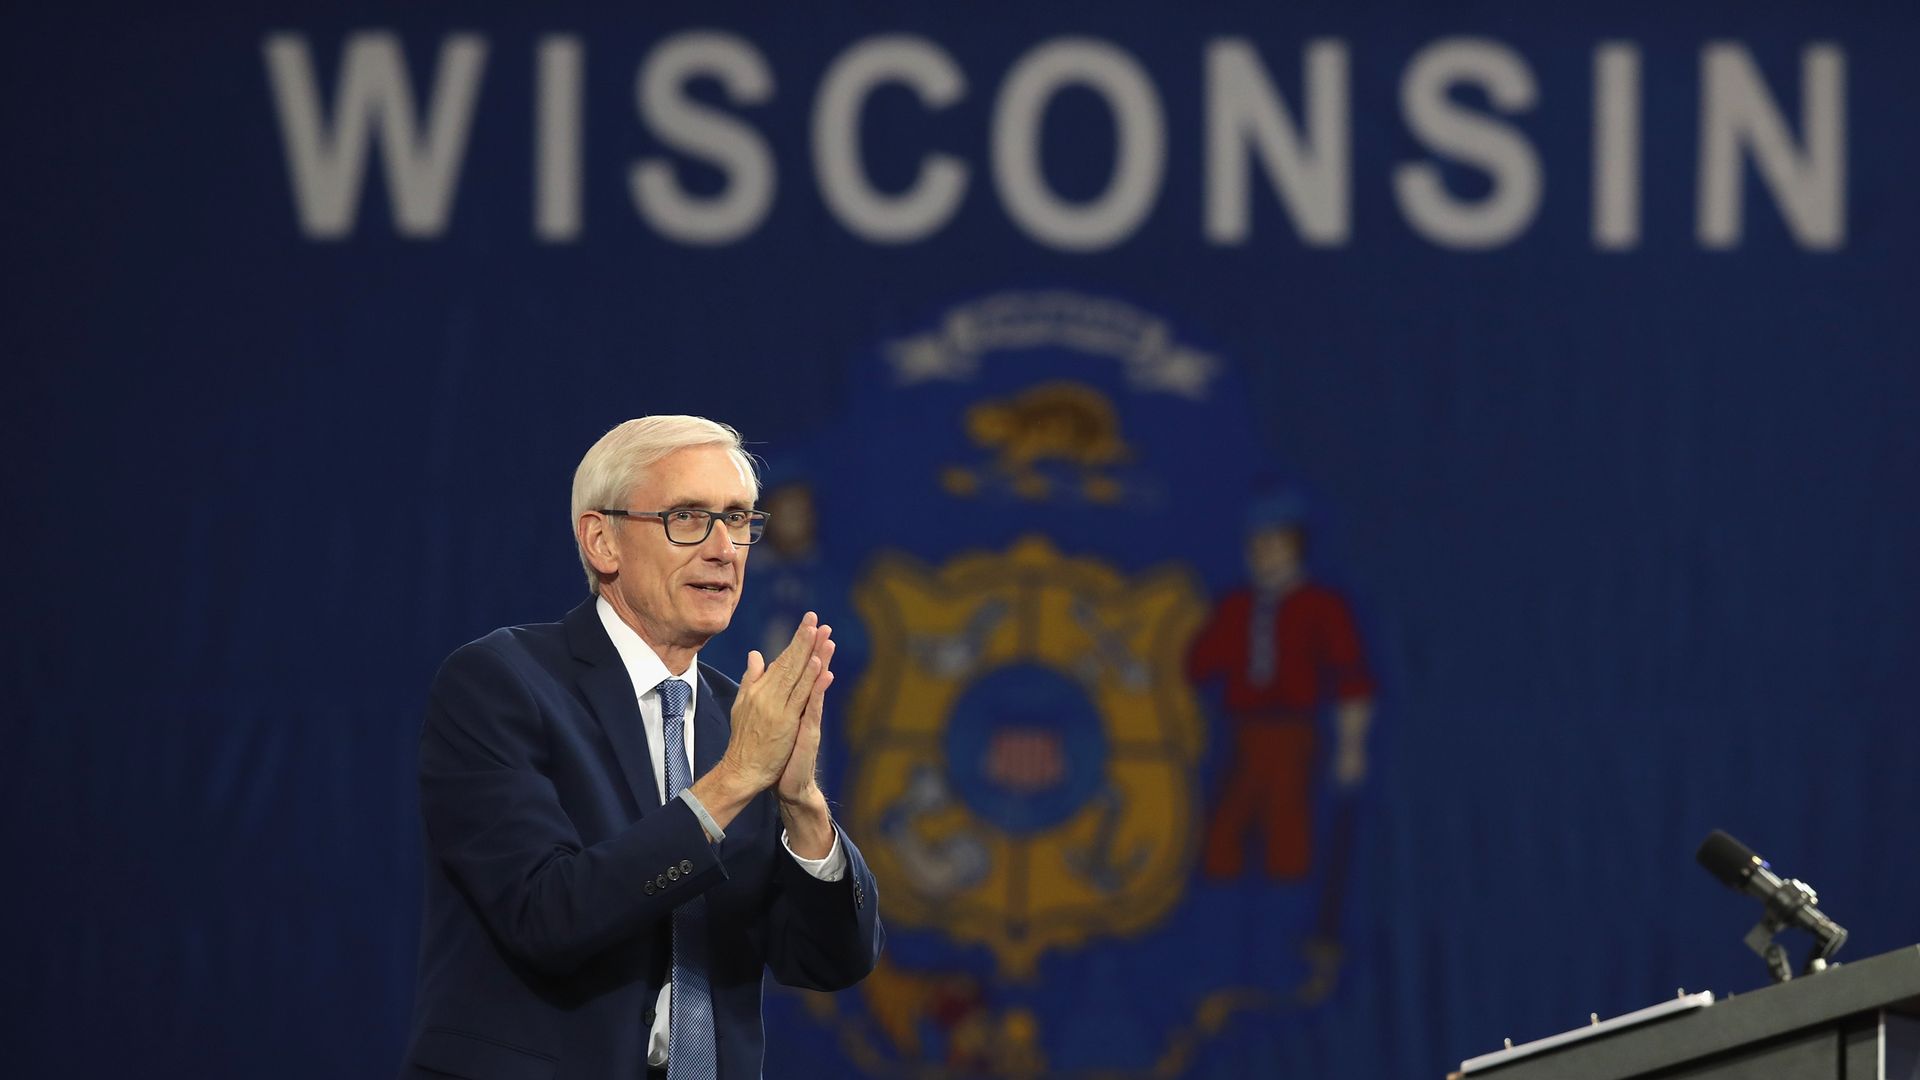 Tony Evers, now governor of Wisconsin, at a rally in 2018.